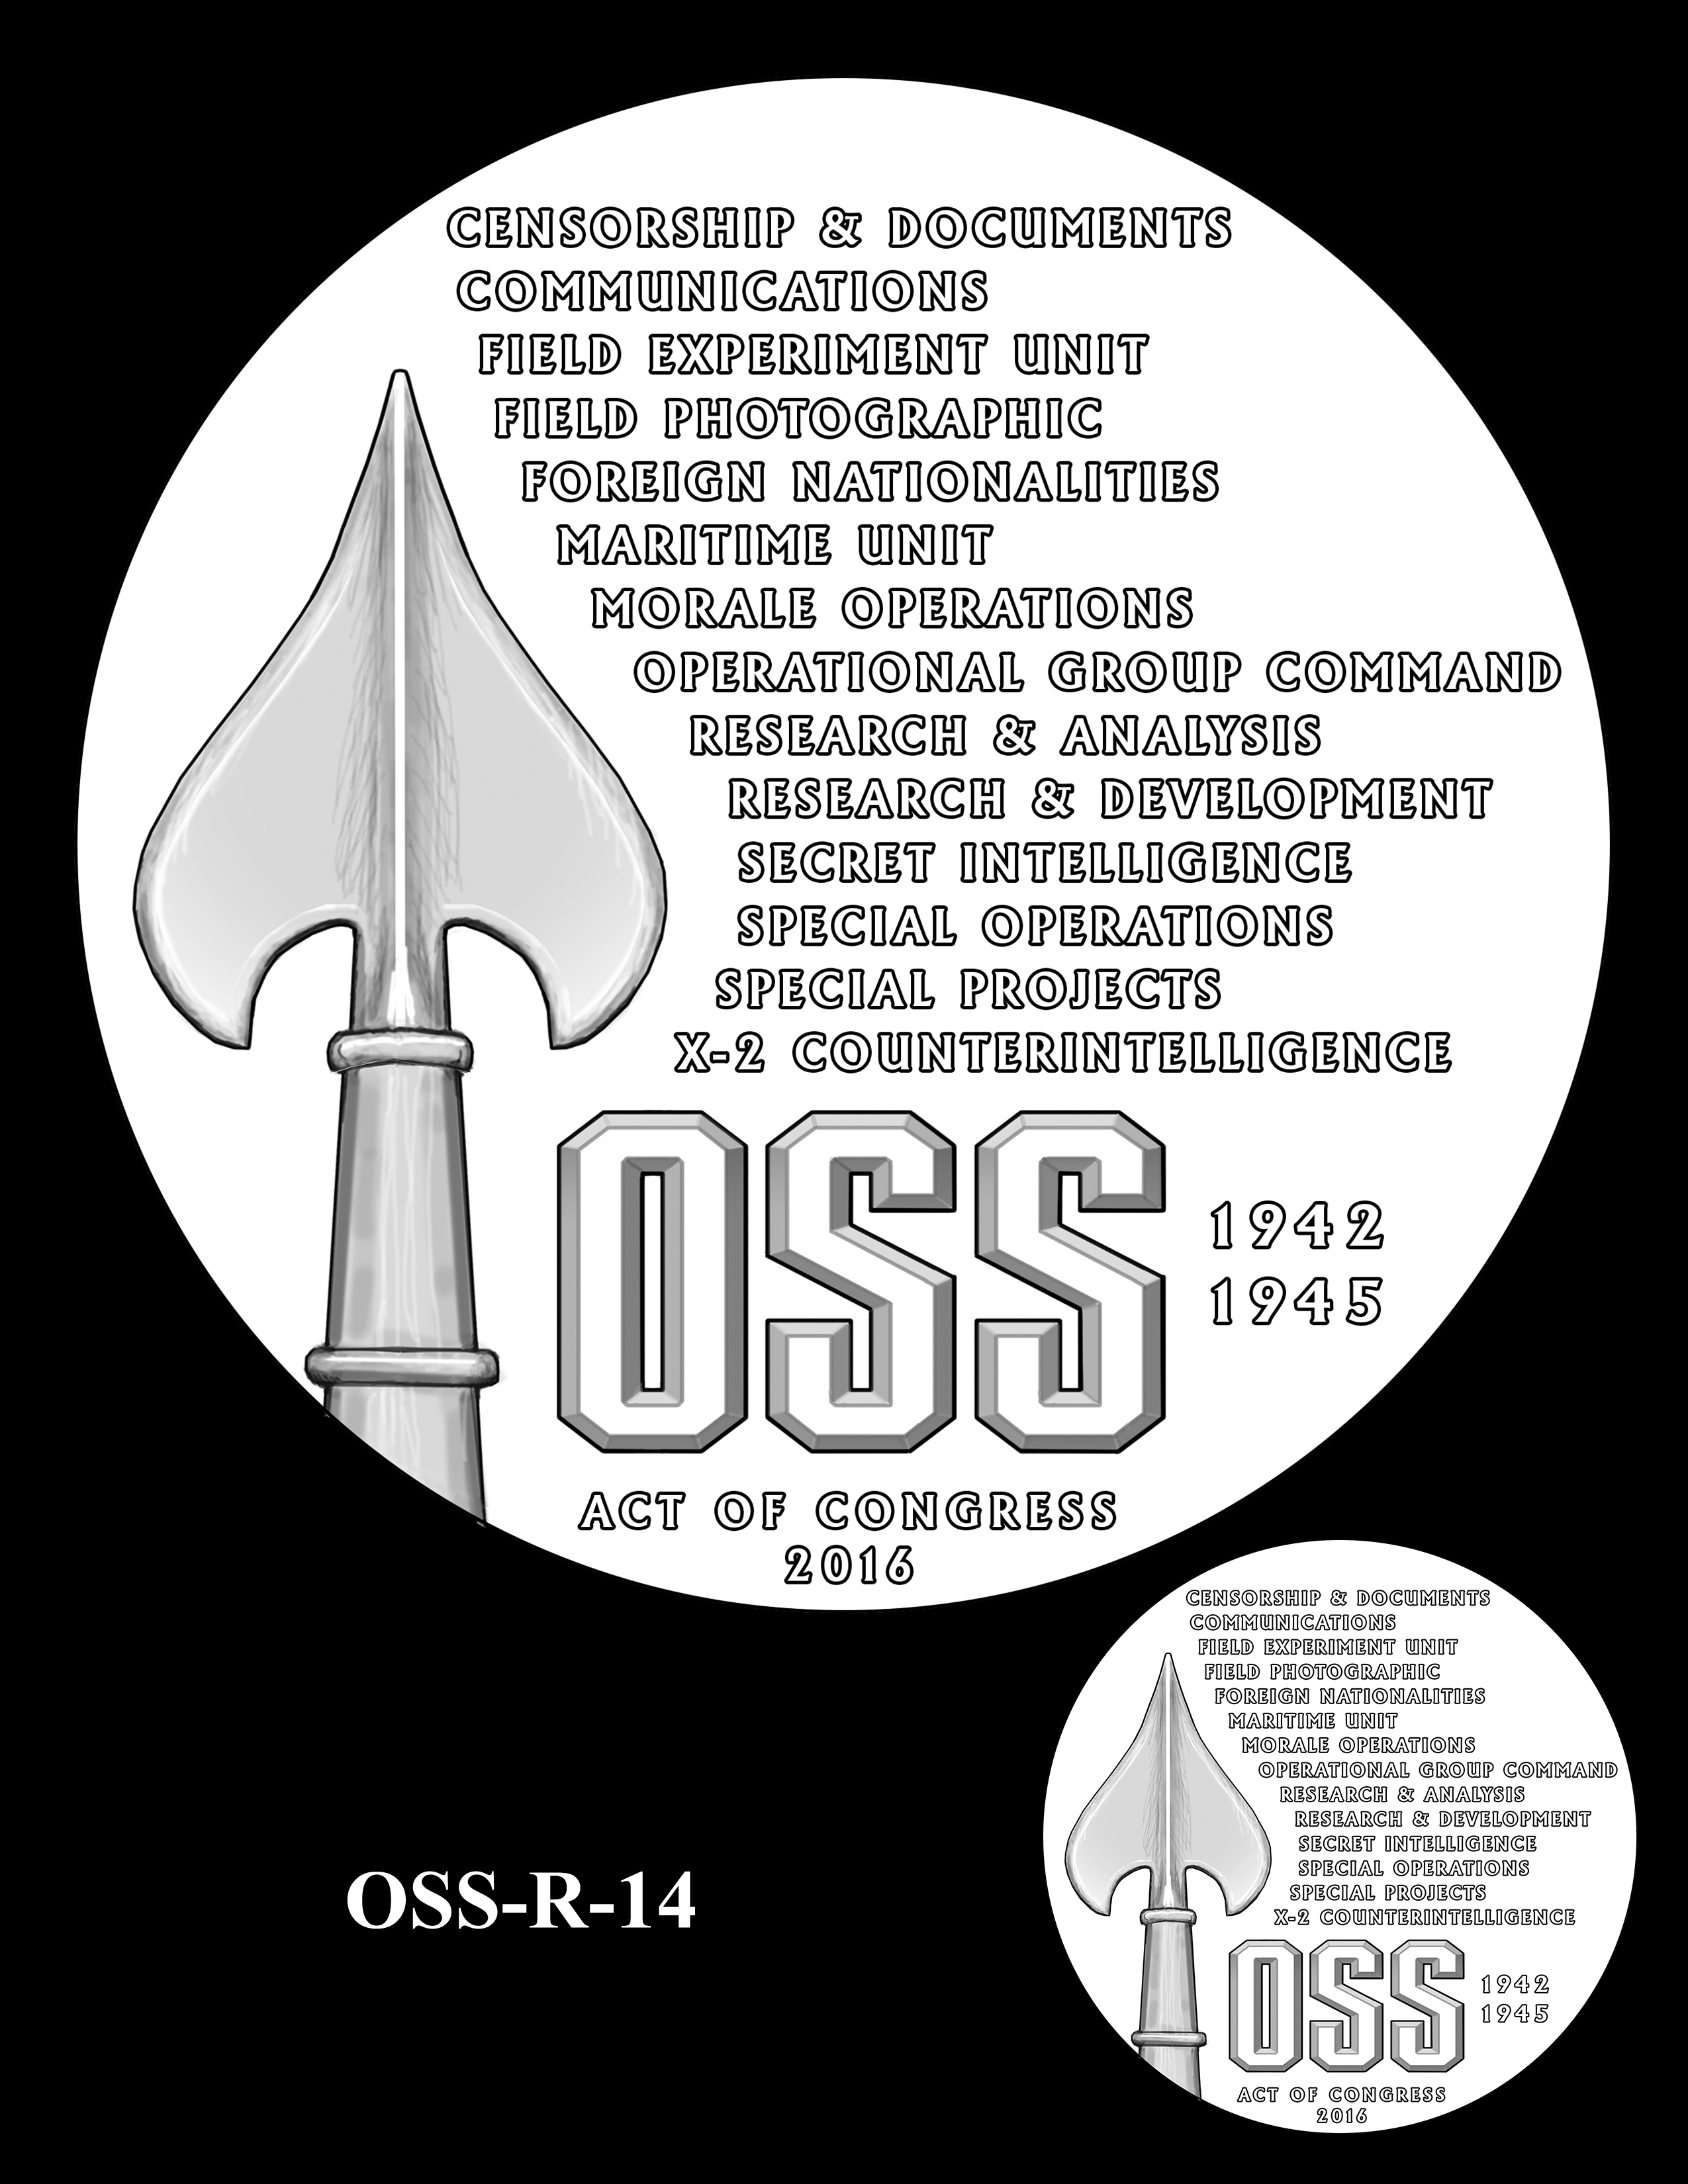 OSS-R-14 -- Office of Strategic Services Congressional Gold Medal